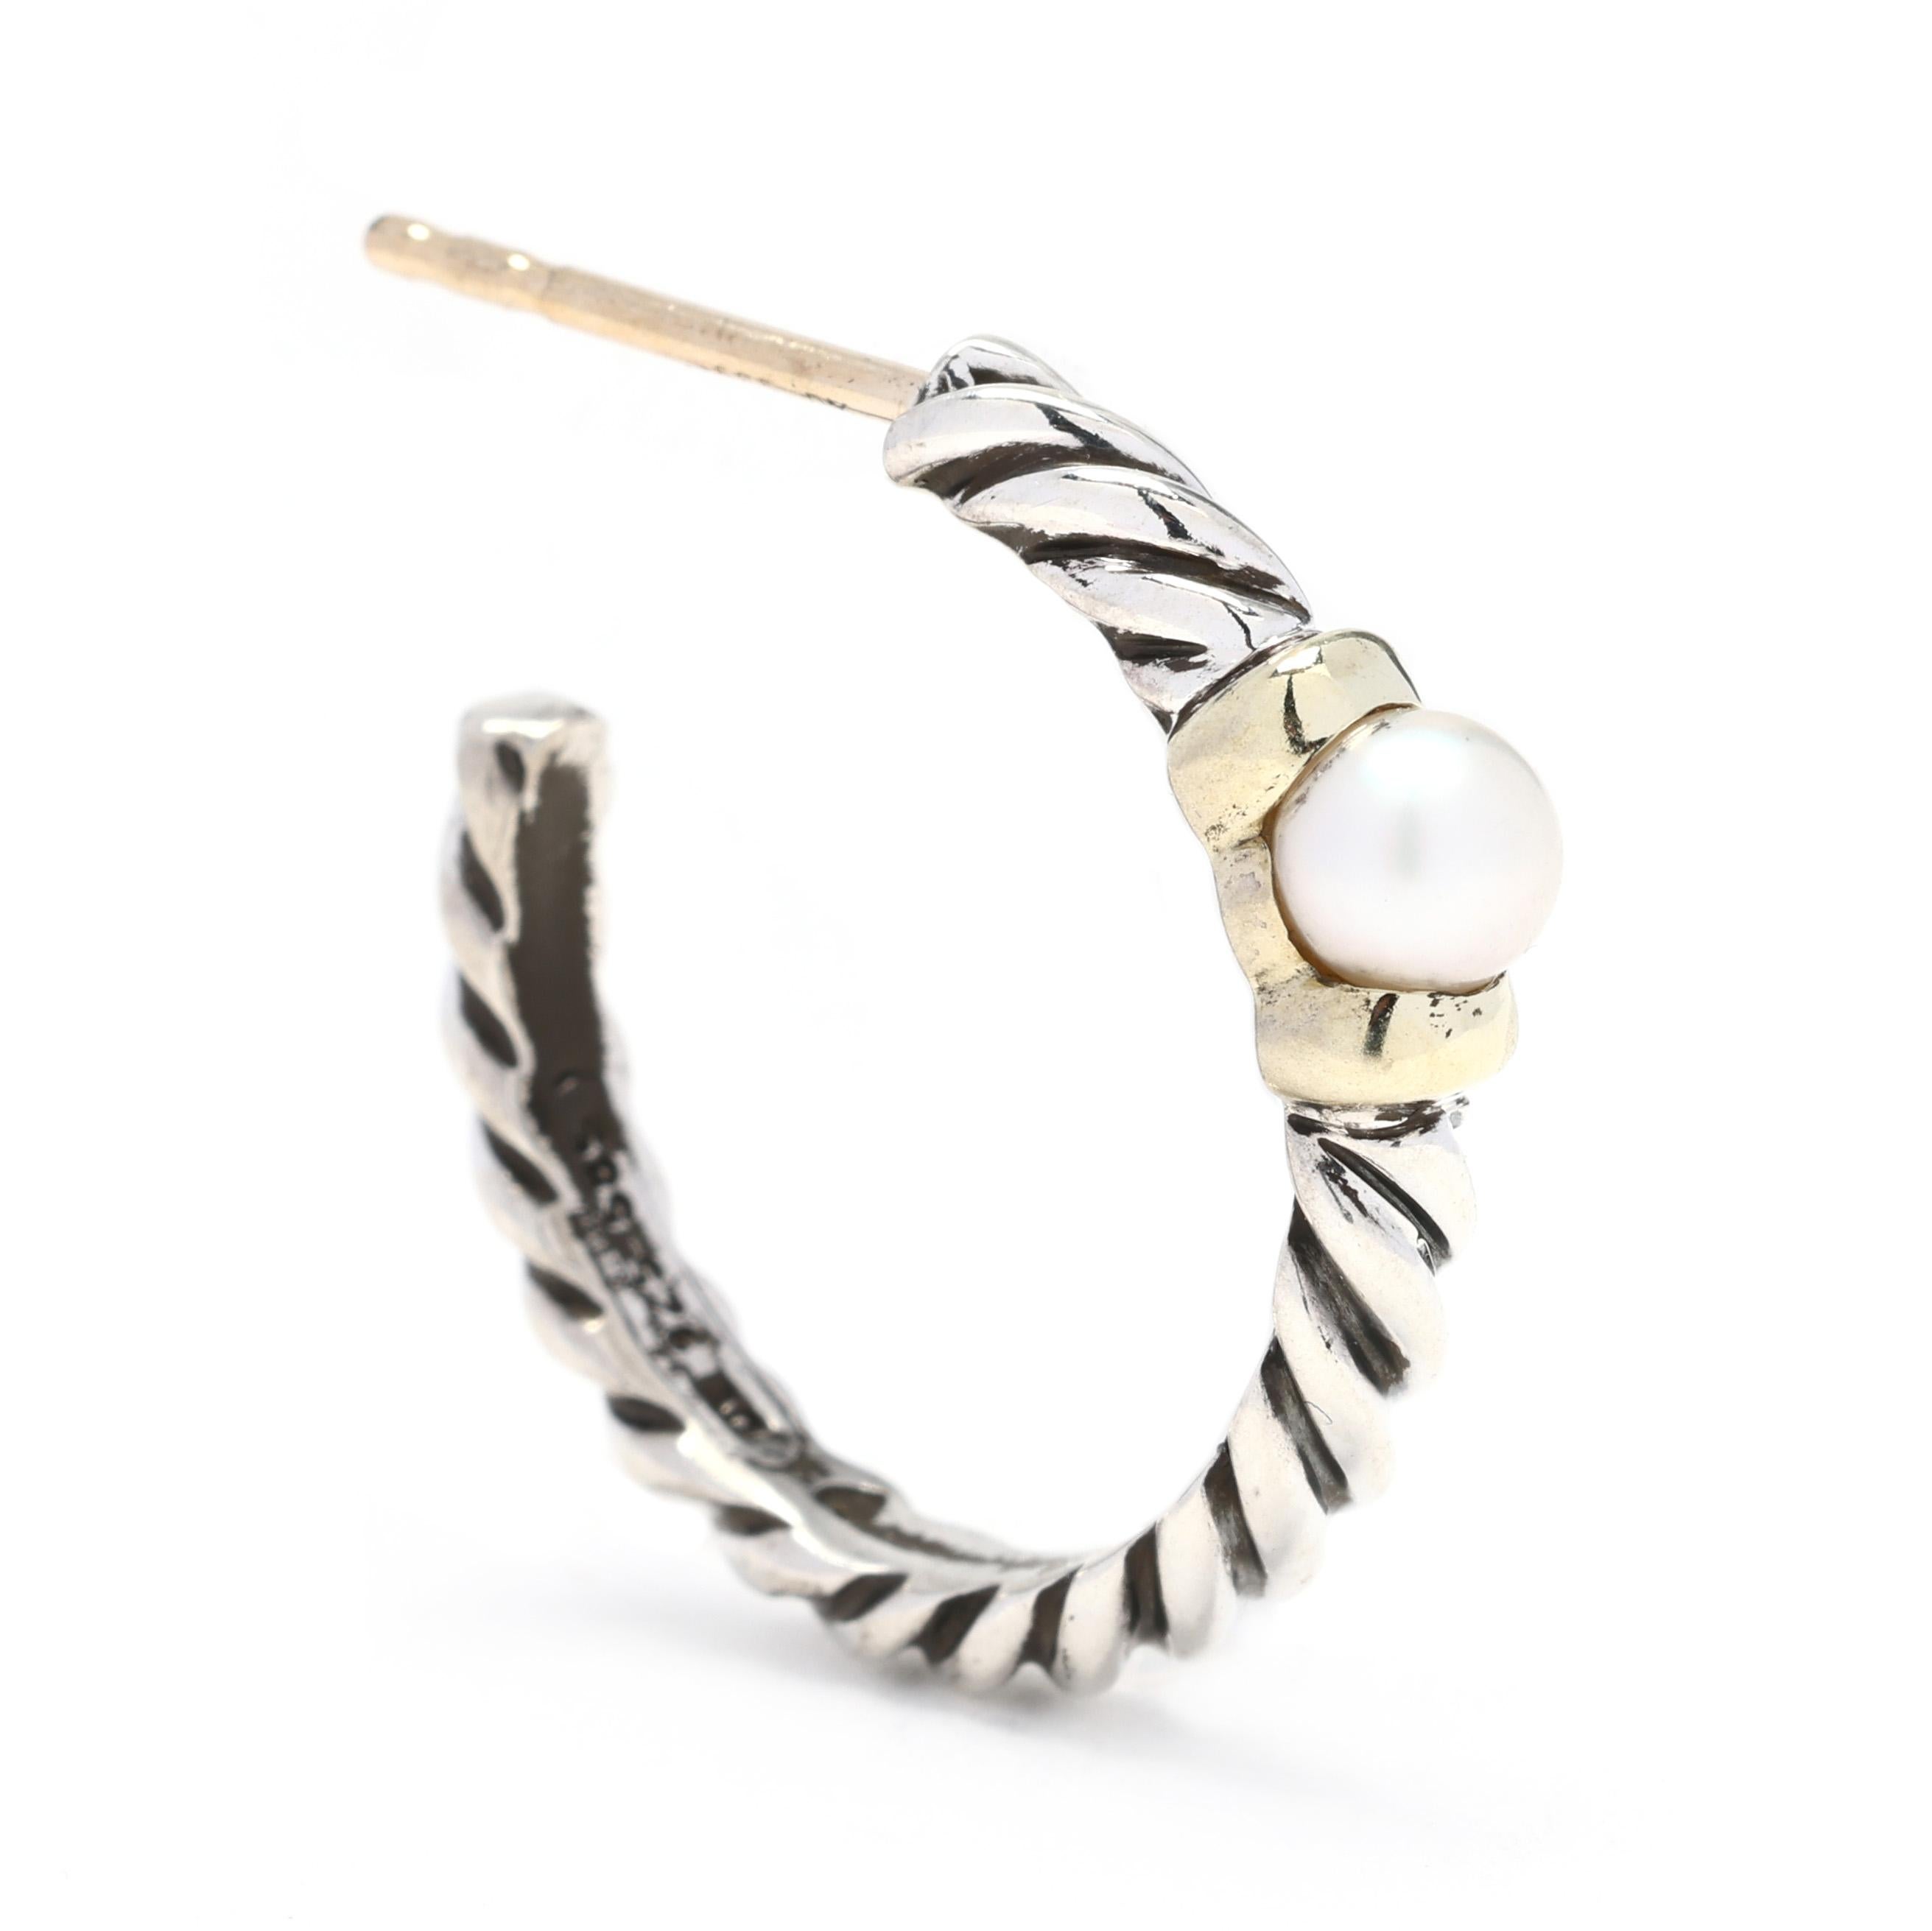 These David Yurman twisted hoops are a timeless addition to your jewelry collection. Made from 14k yellow gold and sterling silver, these hoops feature a beautiful pearl accent that adds a touch of elegance to any outfit. The twisted design adds a